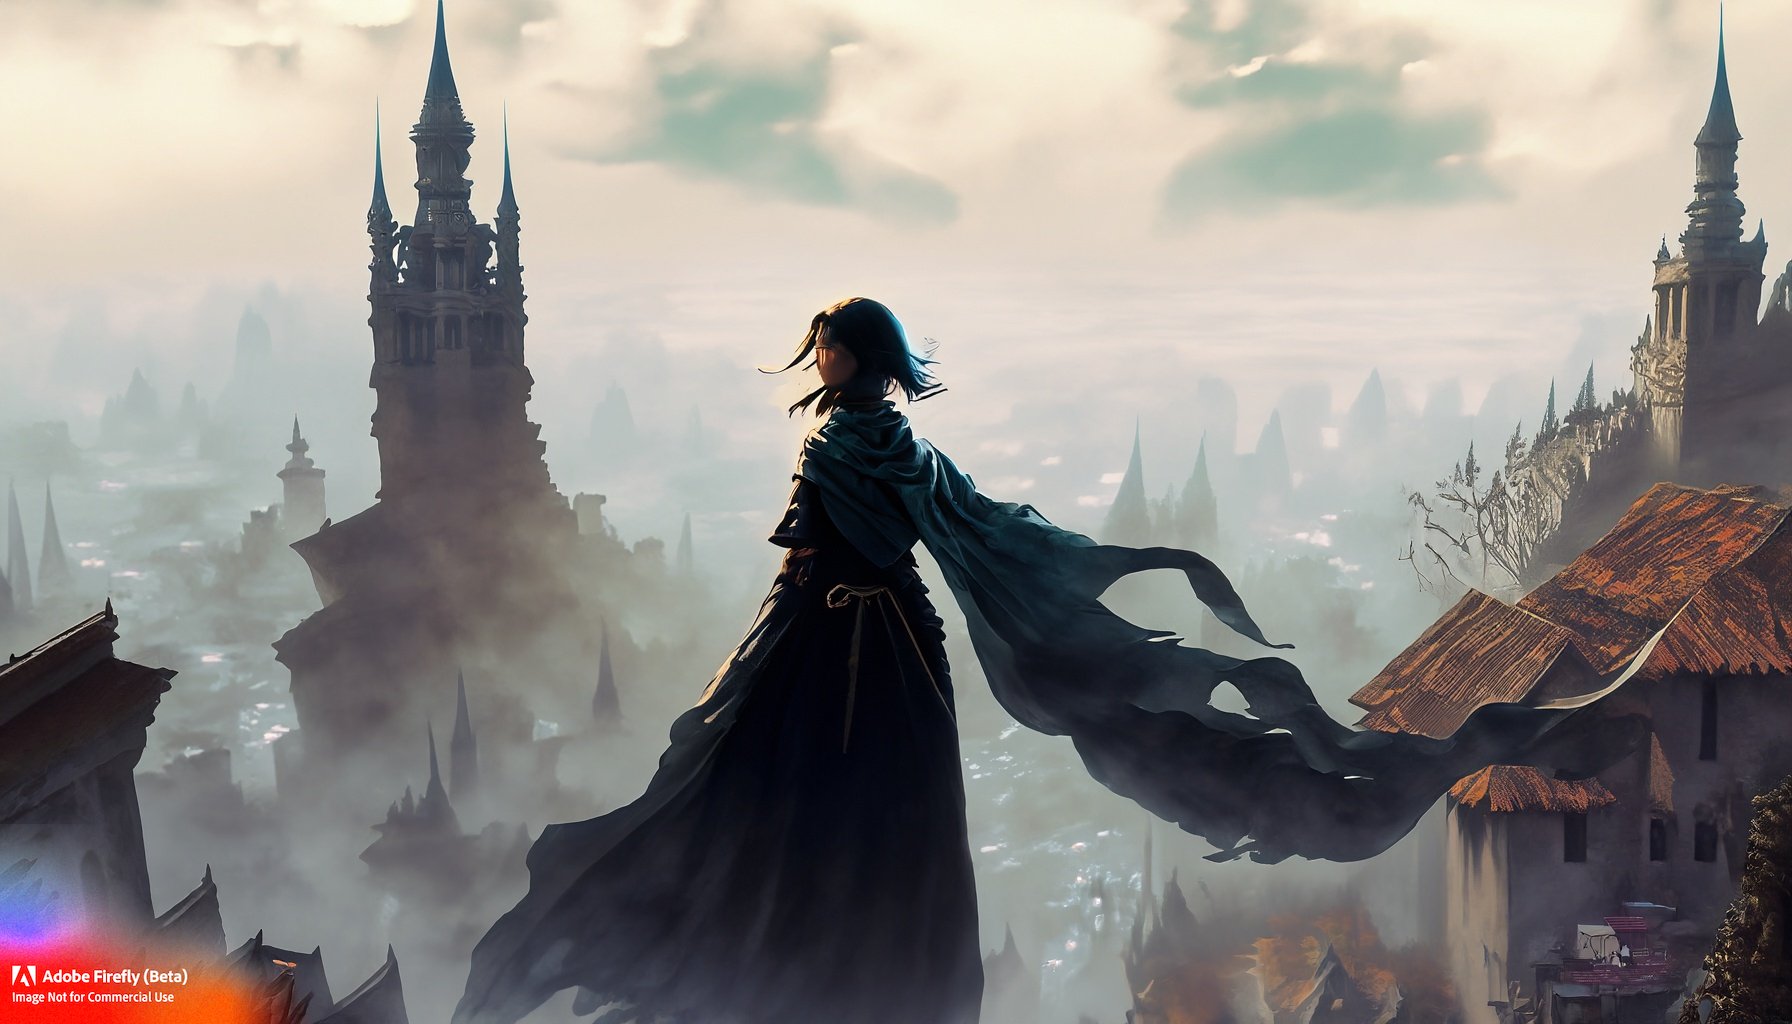 Firefly_mist+and fog, person in a dark cape made of fabric ribbons. The person is flying over an ancient city rooftops, coins, a castle with many spires_art,wide_angle,fantasy_44916.jpg